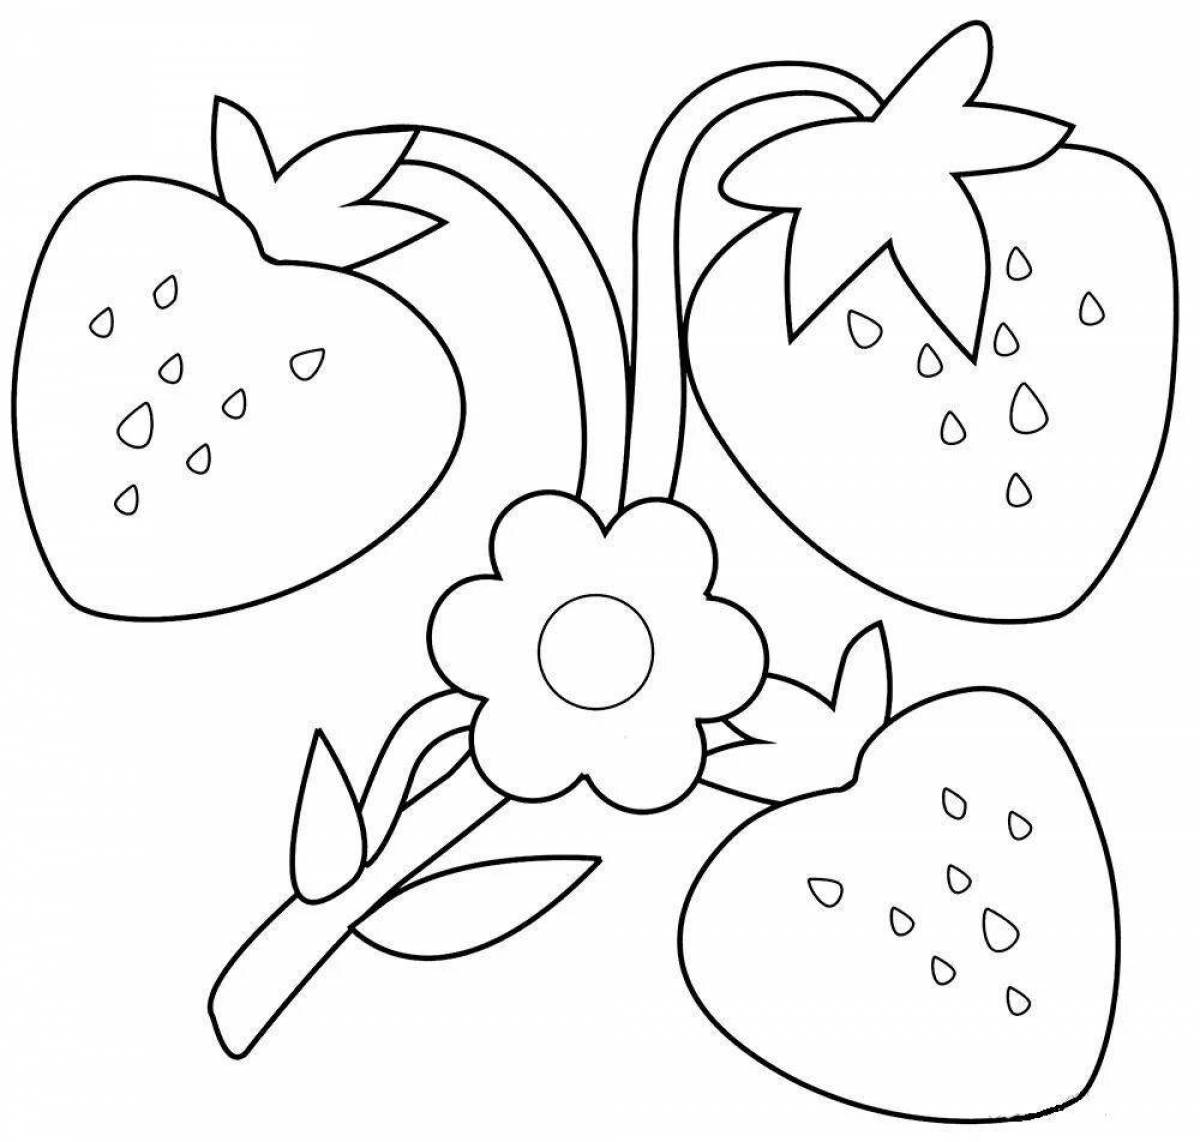 Gorgeous strawberry coloring book for 3-4 year olds